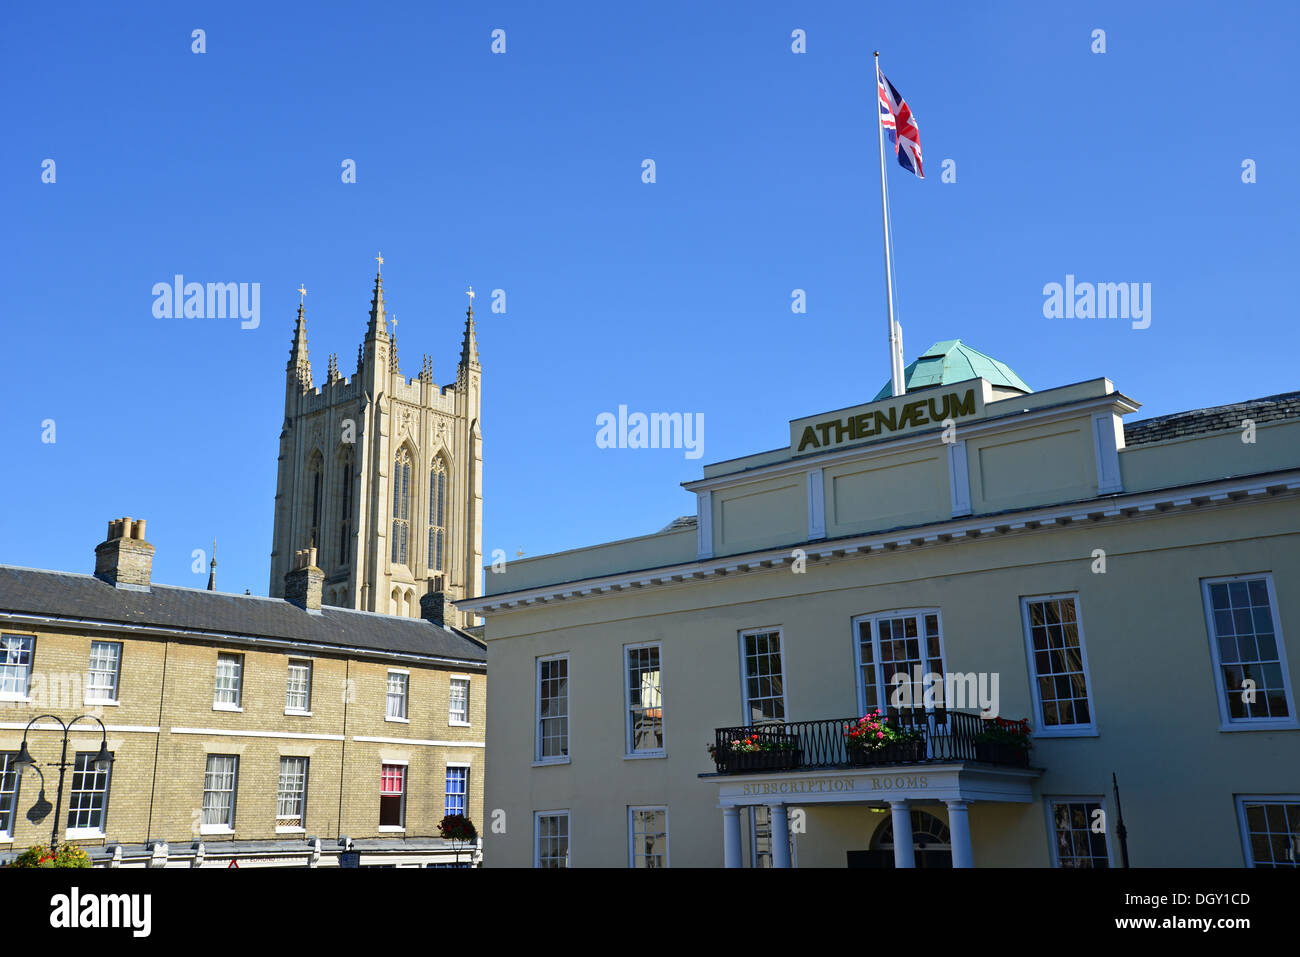 St Edmundsbury Cathedral and Athanaeum Subscription Rooms from Angel Hill, Bury St Edmunds, Suffolk, England, United Kingdom Stock Photo